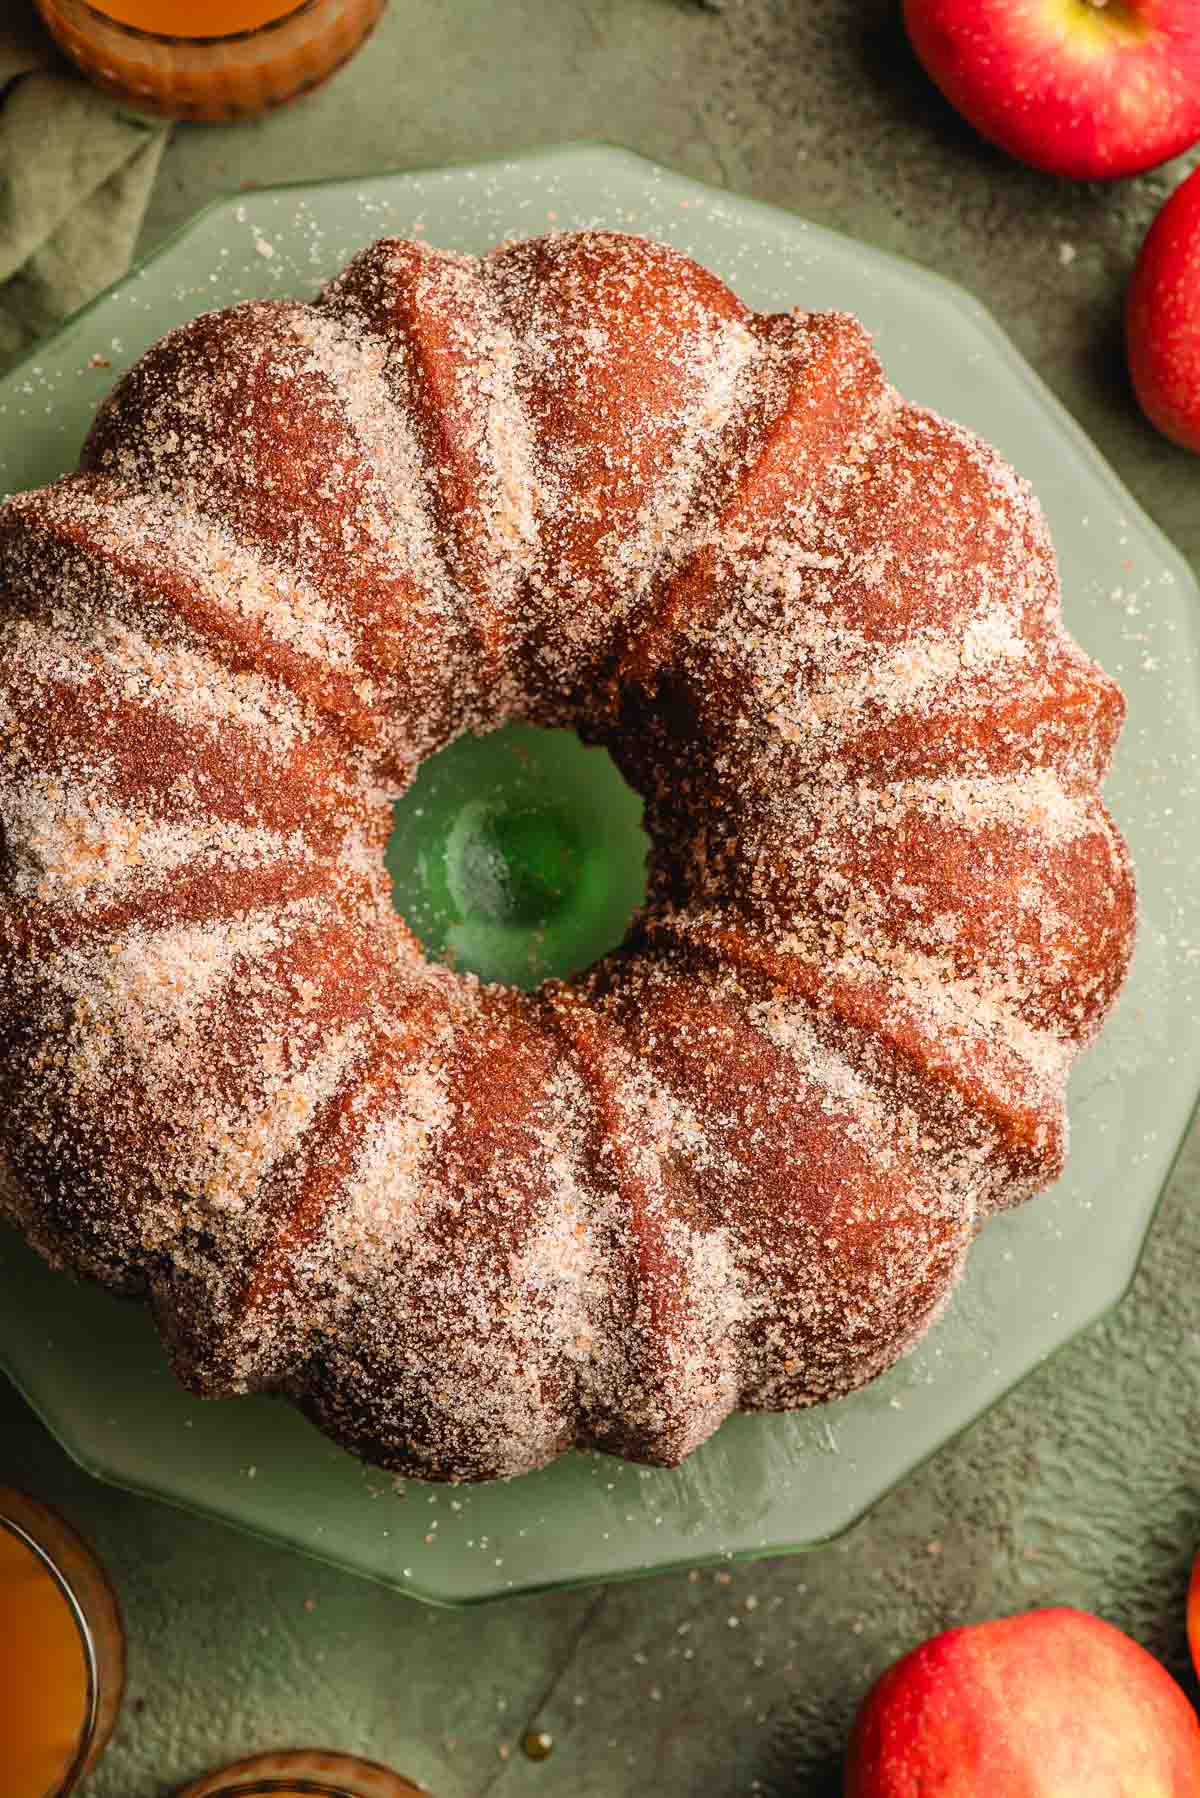 Overhead view of an apple cider bundt cake topped with cinnamon and sugar.